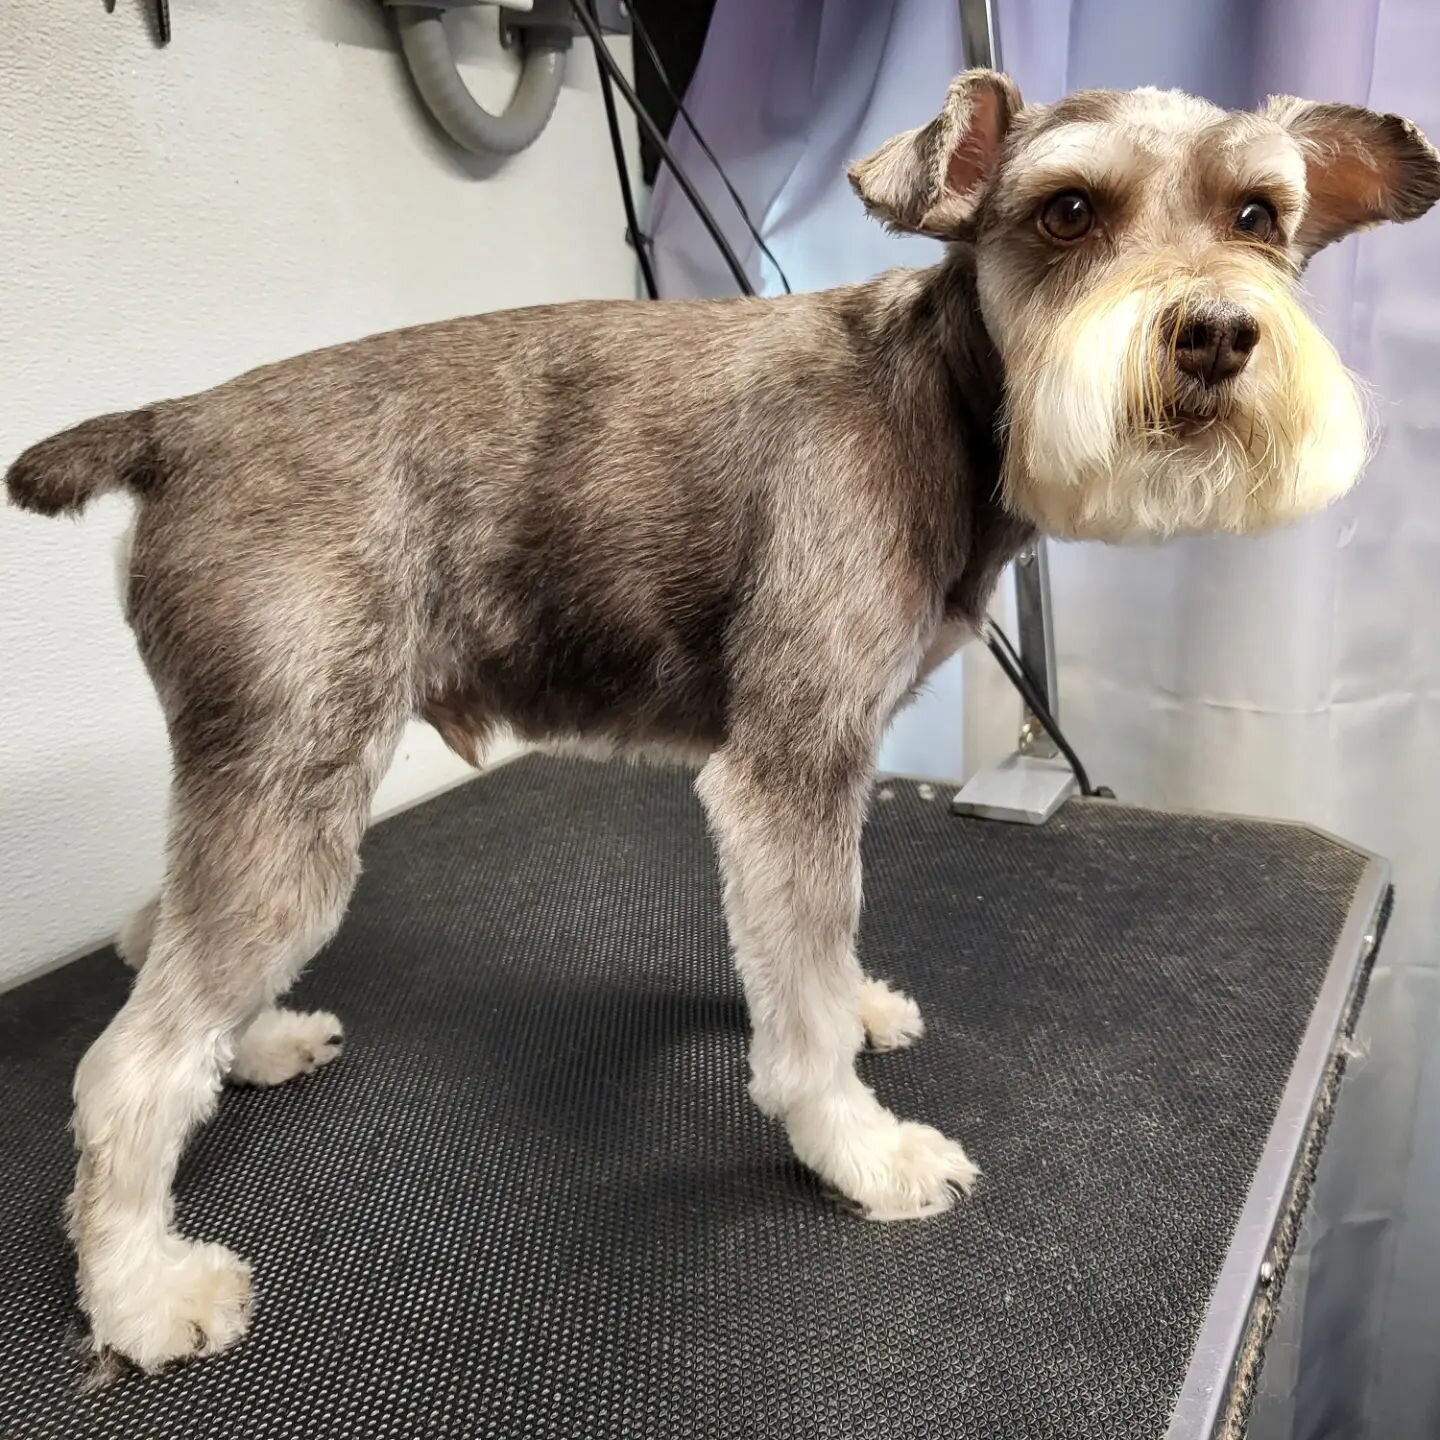 Bruno is a little spicy like most Schnauzers but he is also sooo handsome!
.
.
#dogstagram #doggroomer #schnauzer #schnauzersofinstagram #groomersofinstagram #groomingday #groominglife